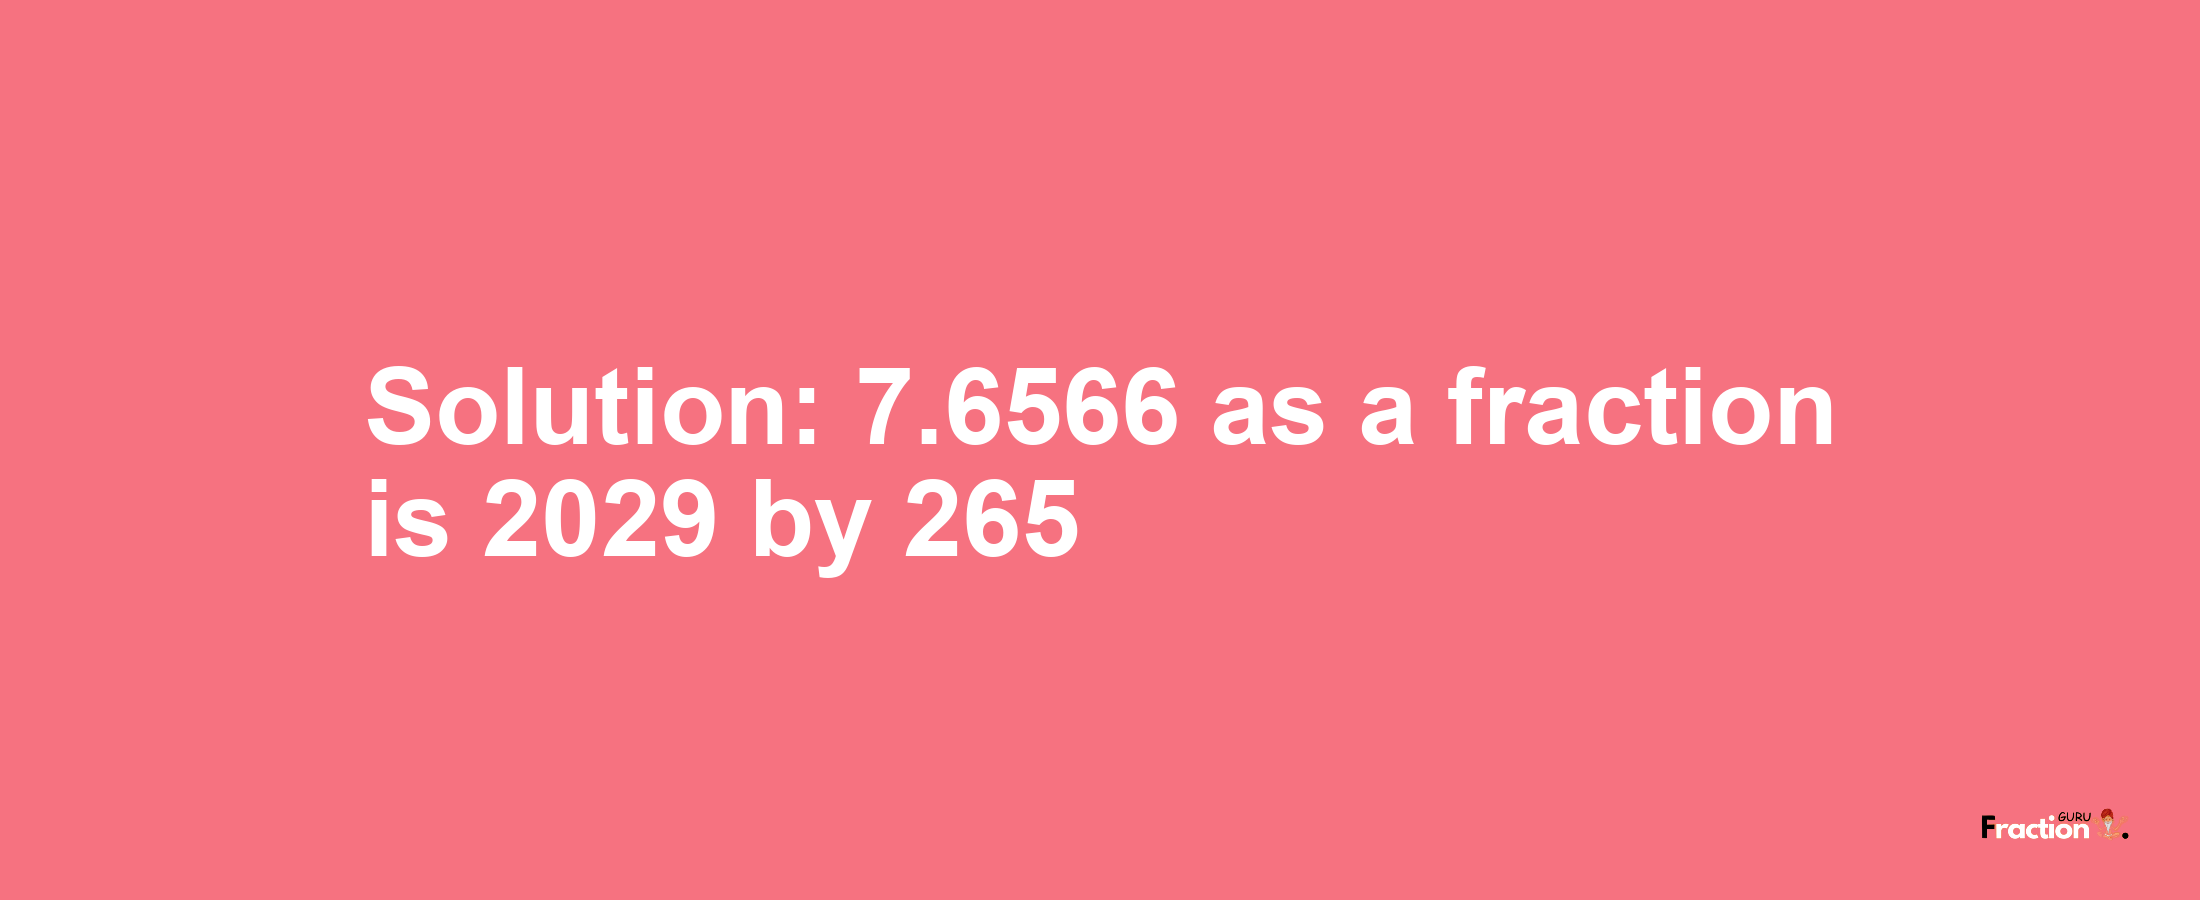 Solution:7.6566 as a fraction is 2029/265